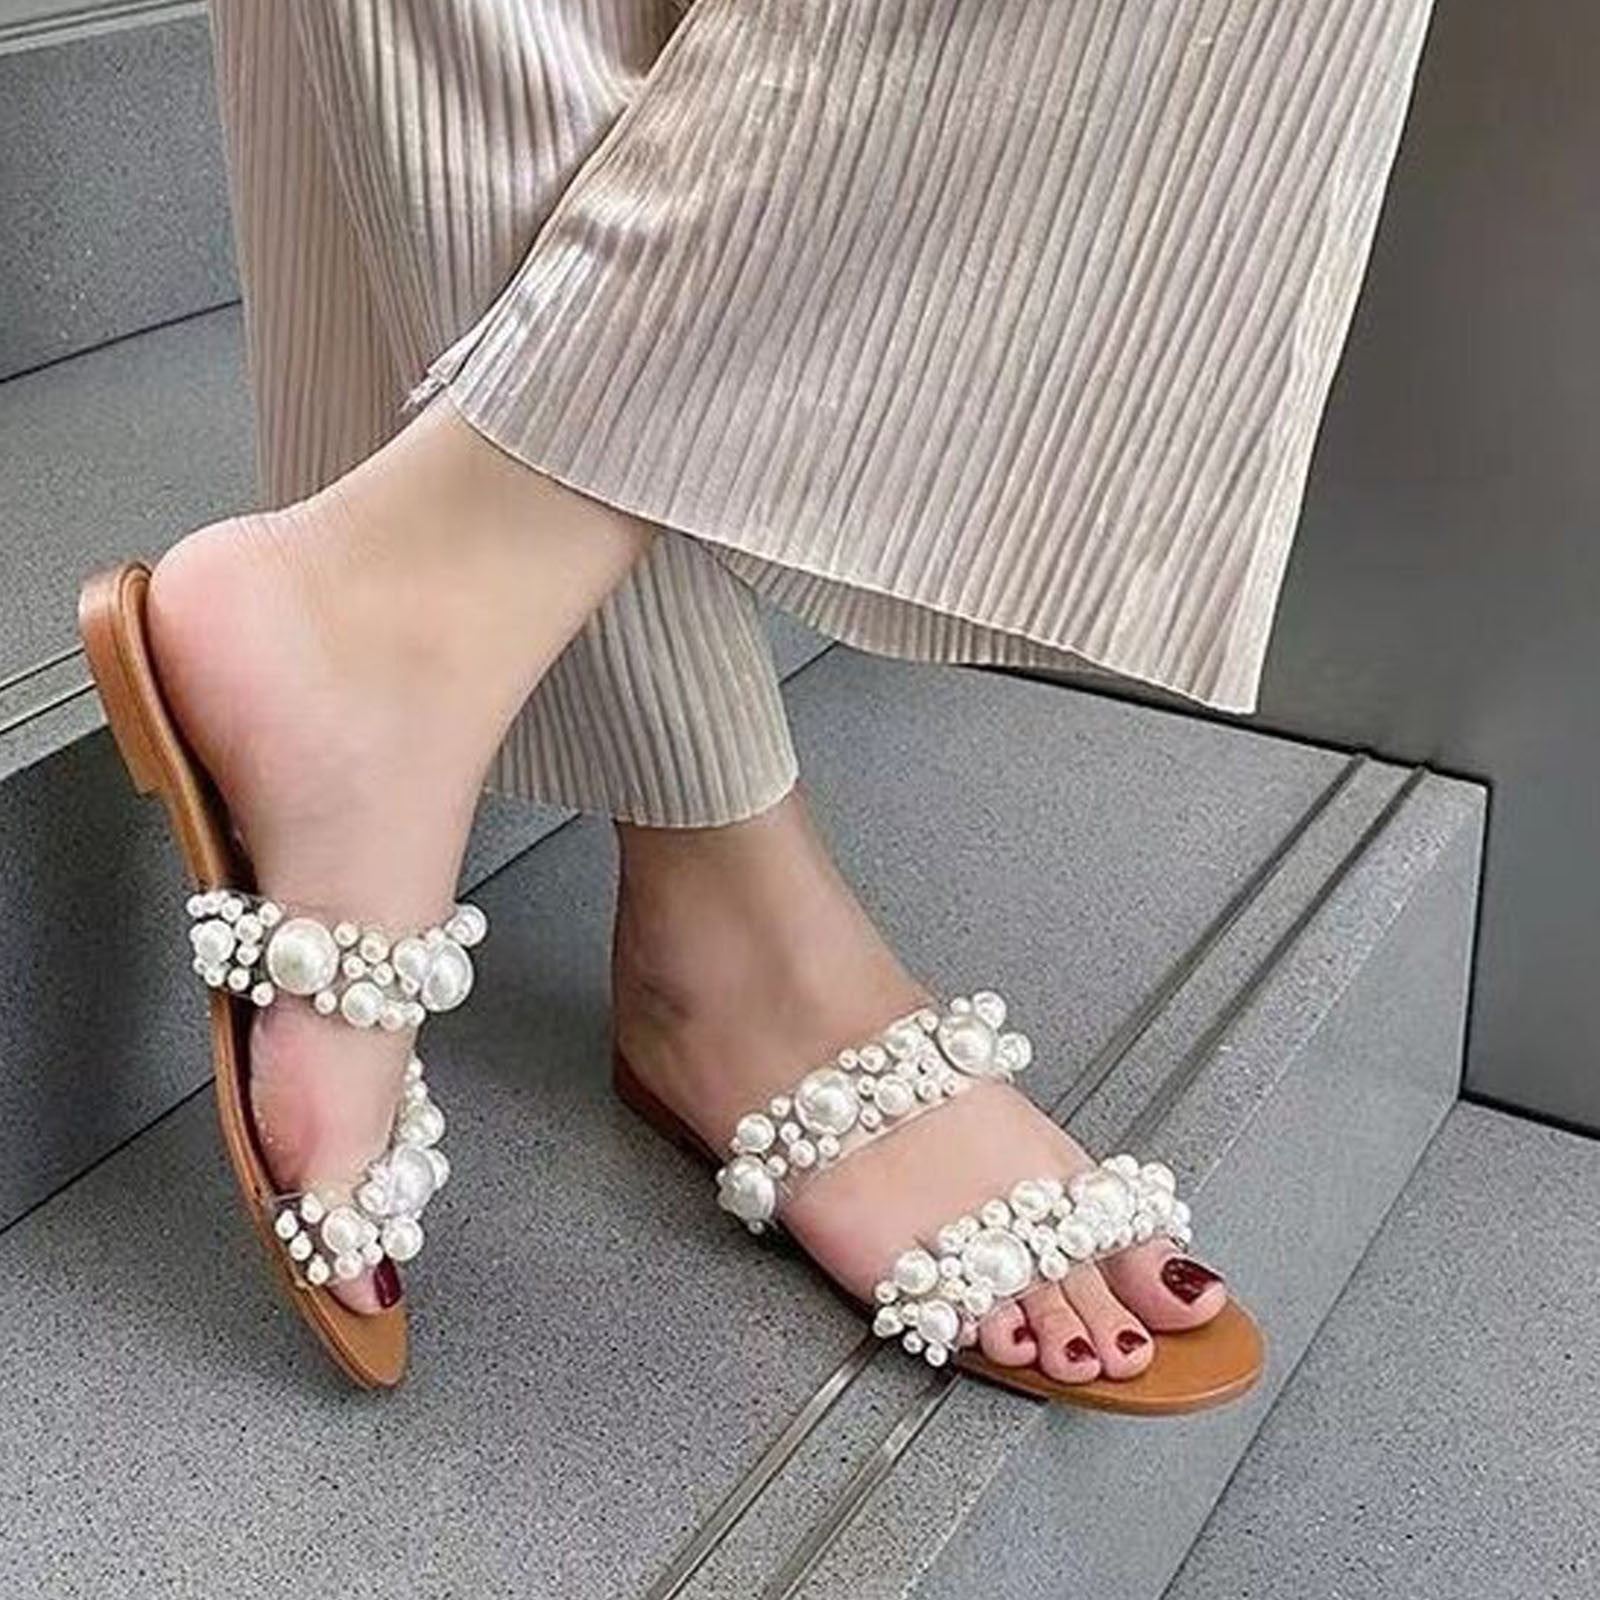 Zara Pearly Pearl Strappy Sandals Slides US 9 / Euro 40 # 2600/201 BLOG  FAVE | eBay